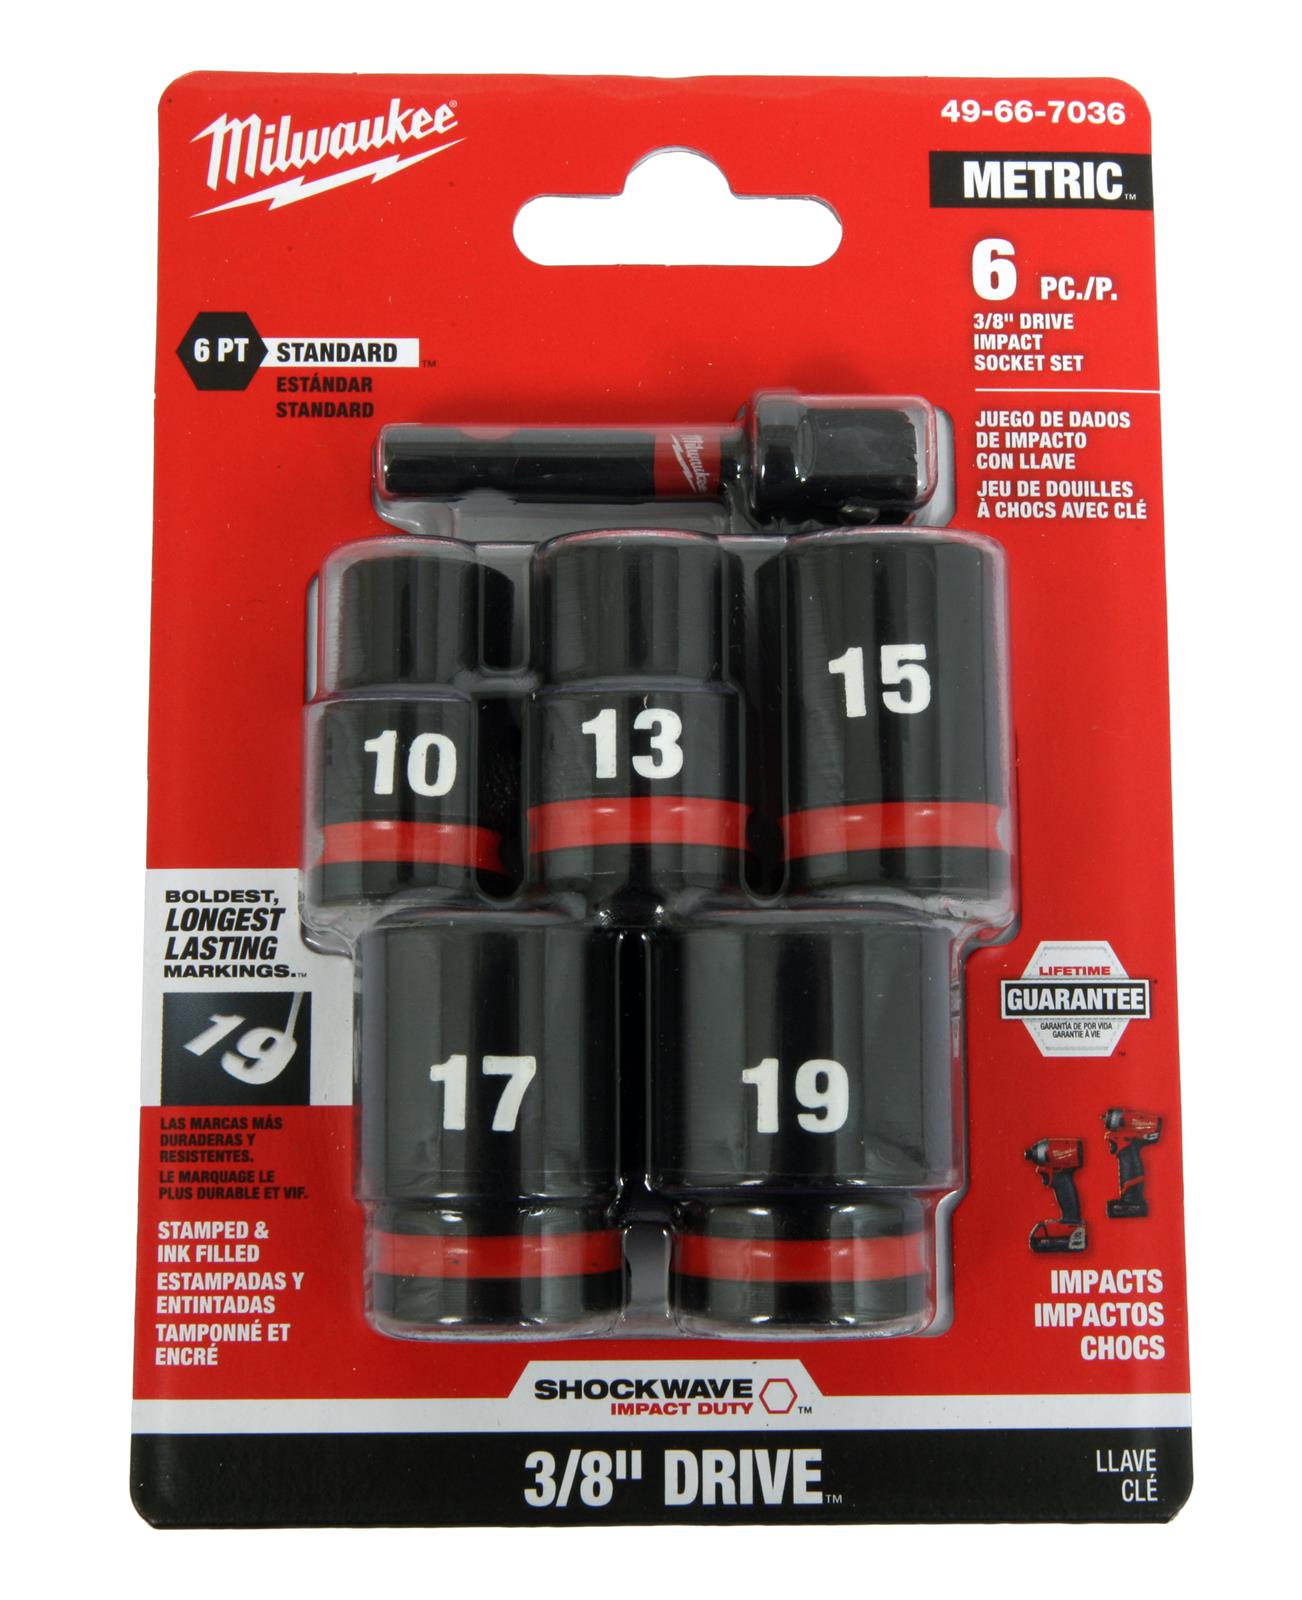 Milwaukee releases new Shockwave Impact Duty six-point sockets